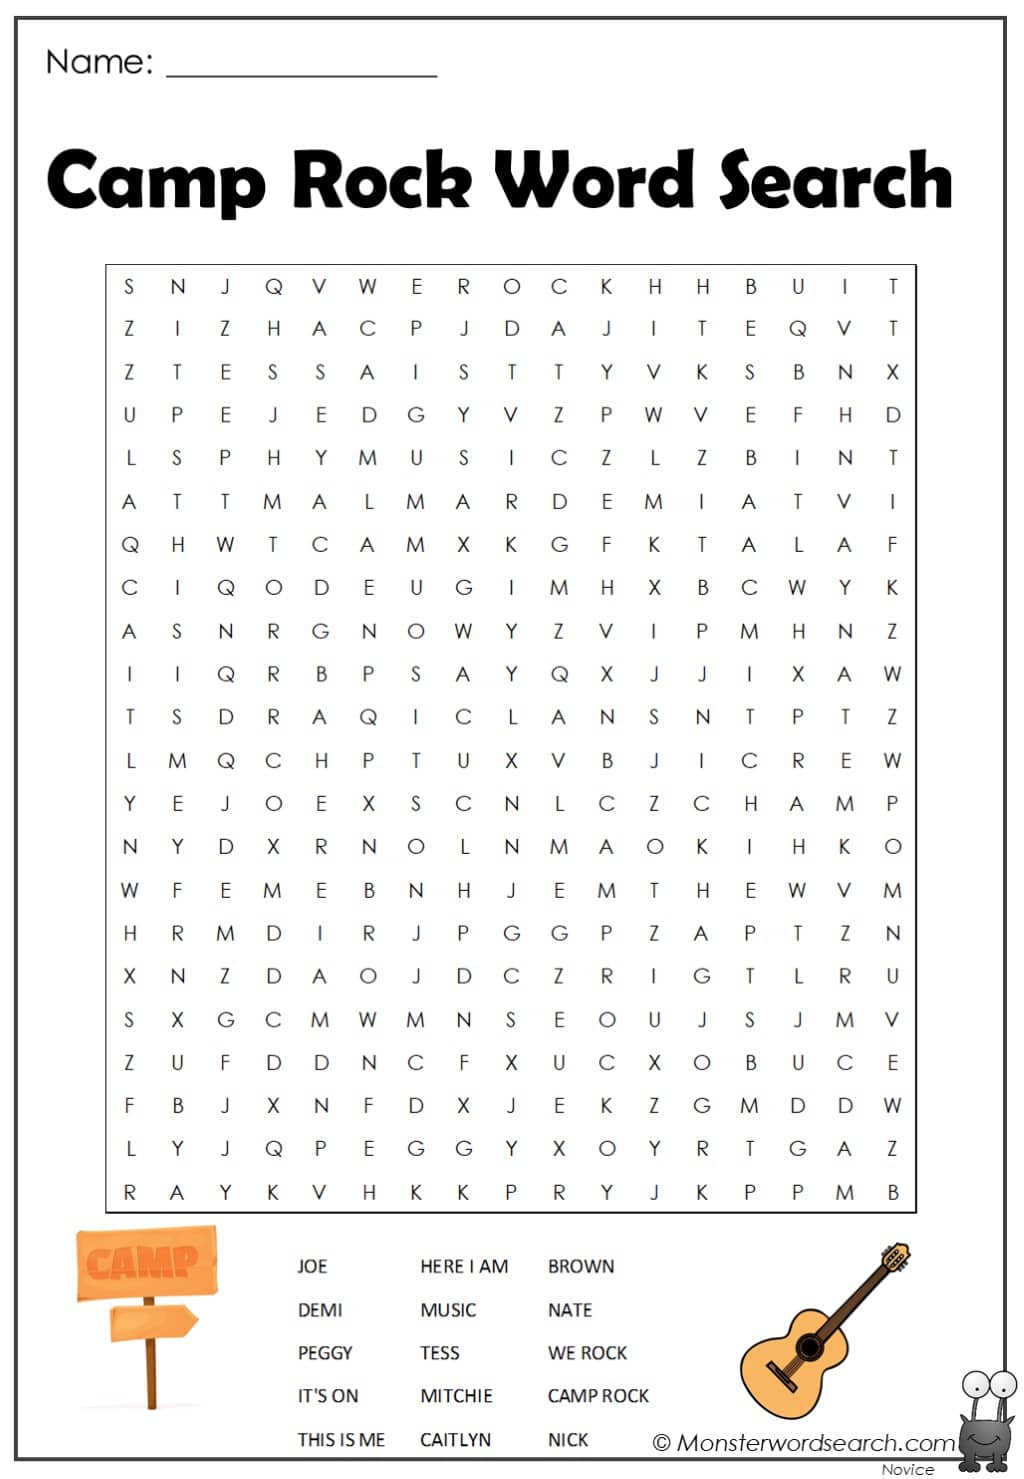 Camp Rock Word Search